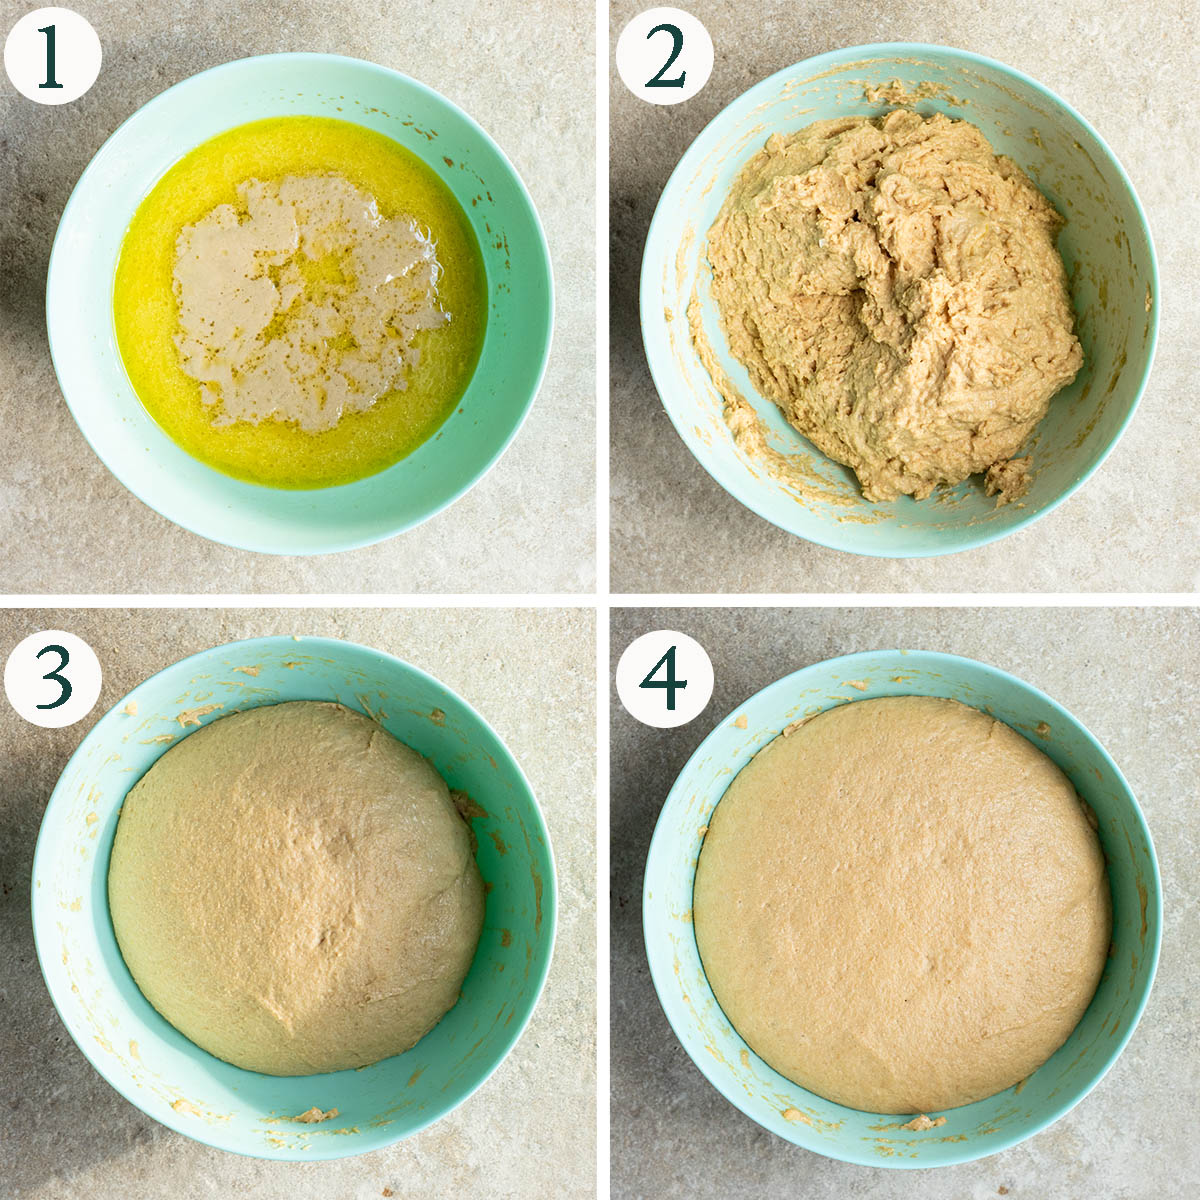 Bread steps 1 to 4, yeast mixture, dough before and after kneading and after rising.